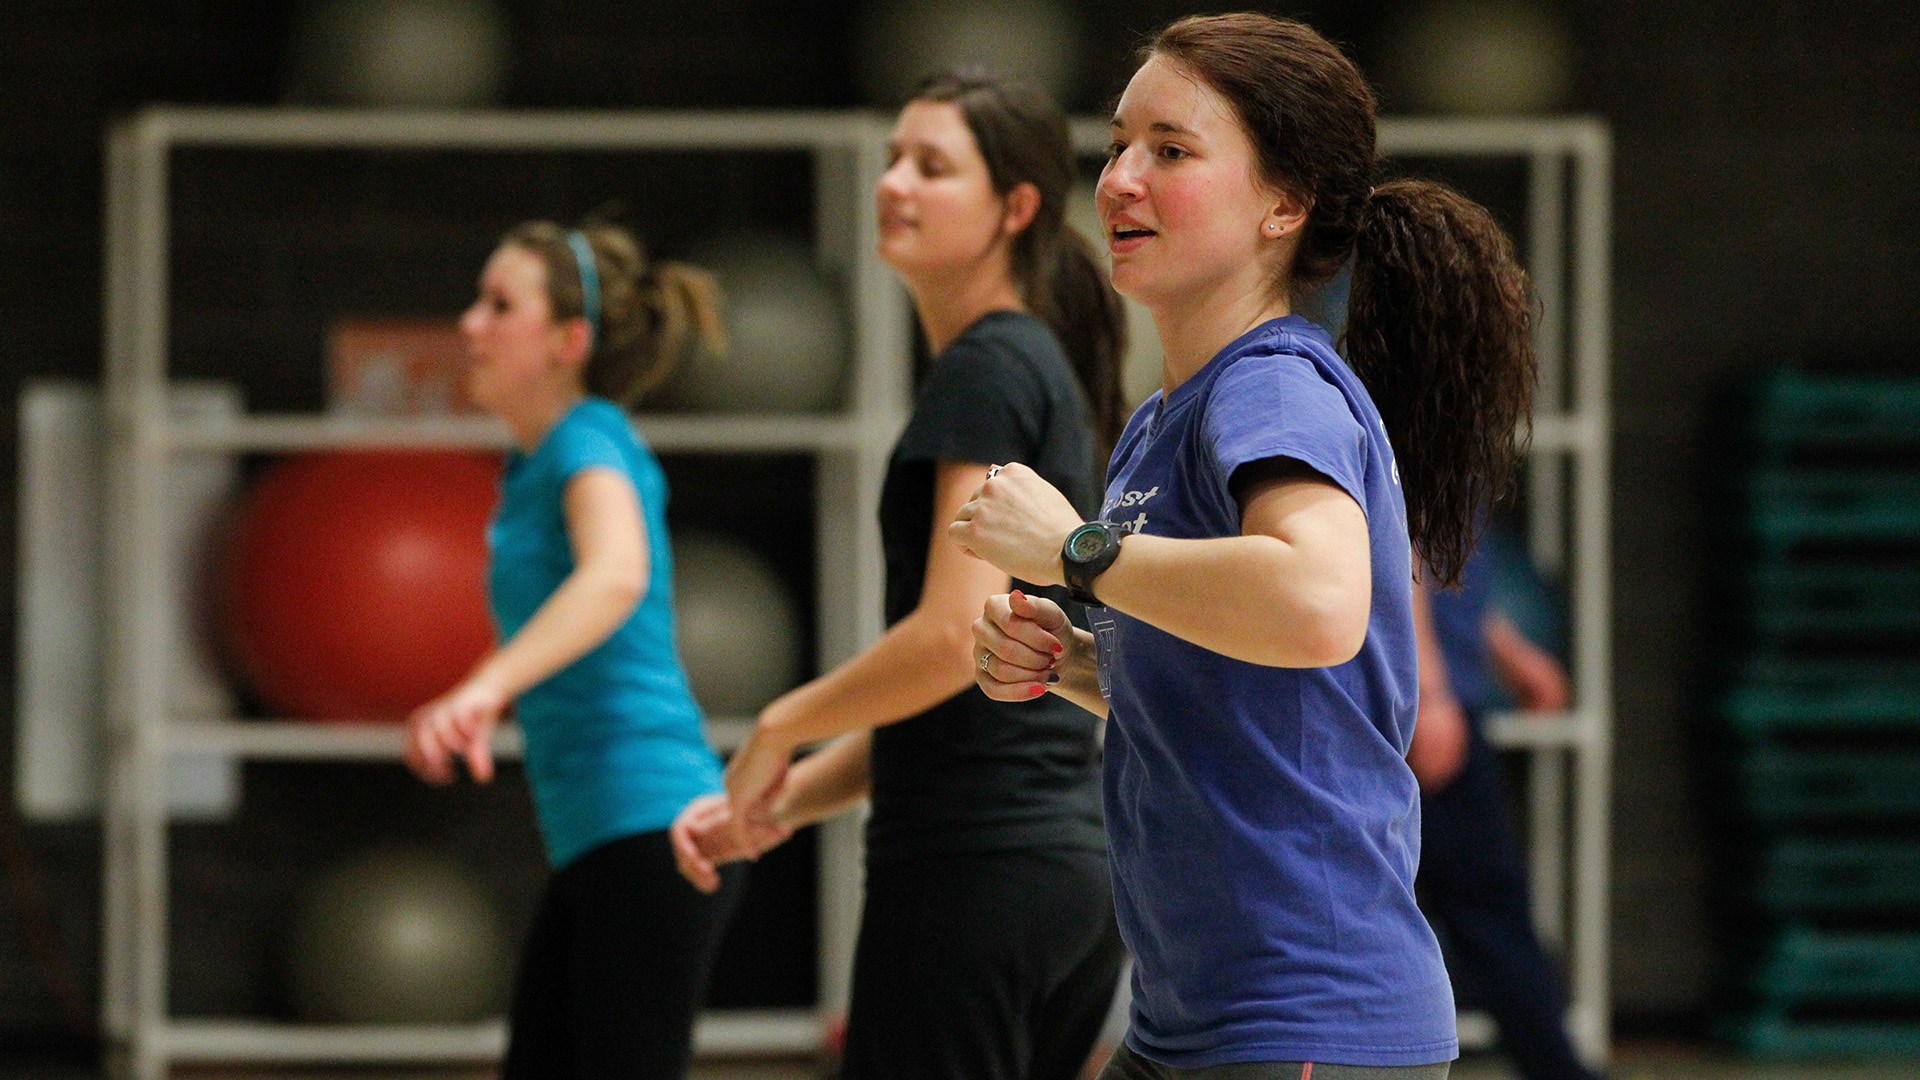 People participate in an exercise class.